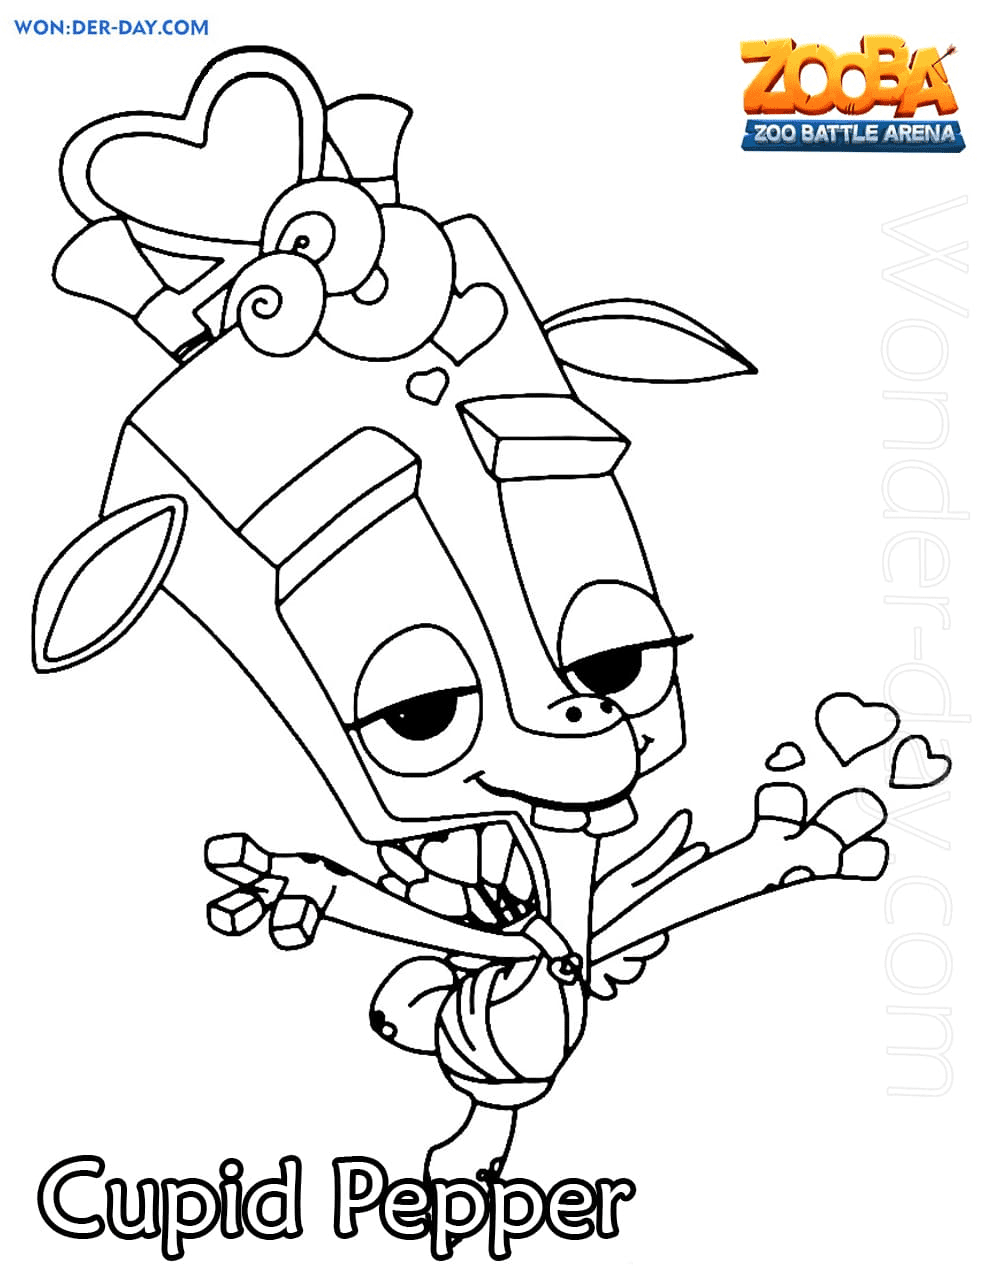 Cupid Pepper Zooba Coloring Page